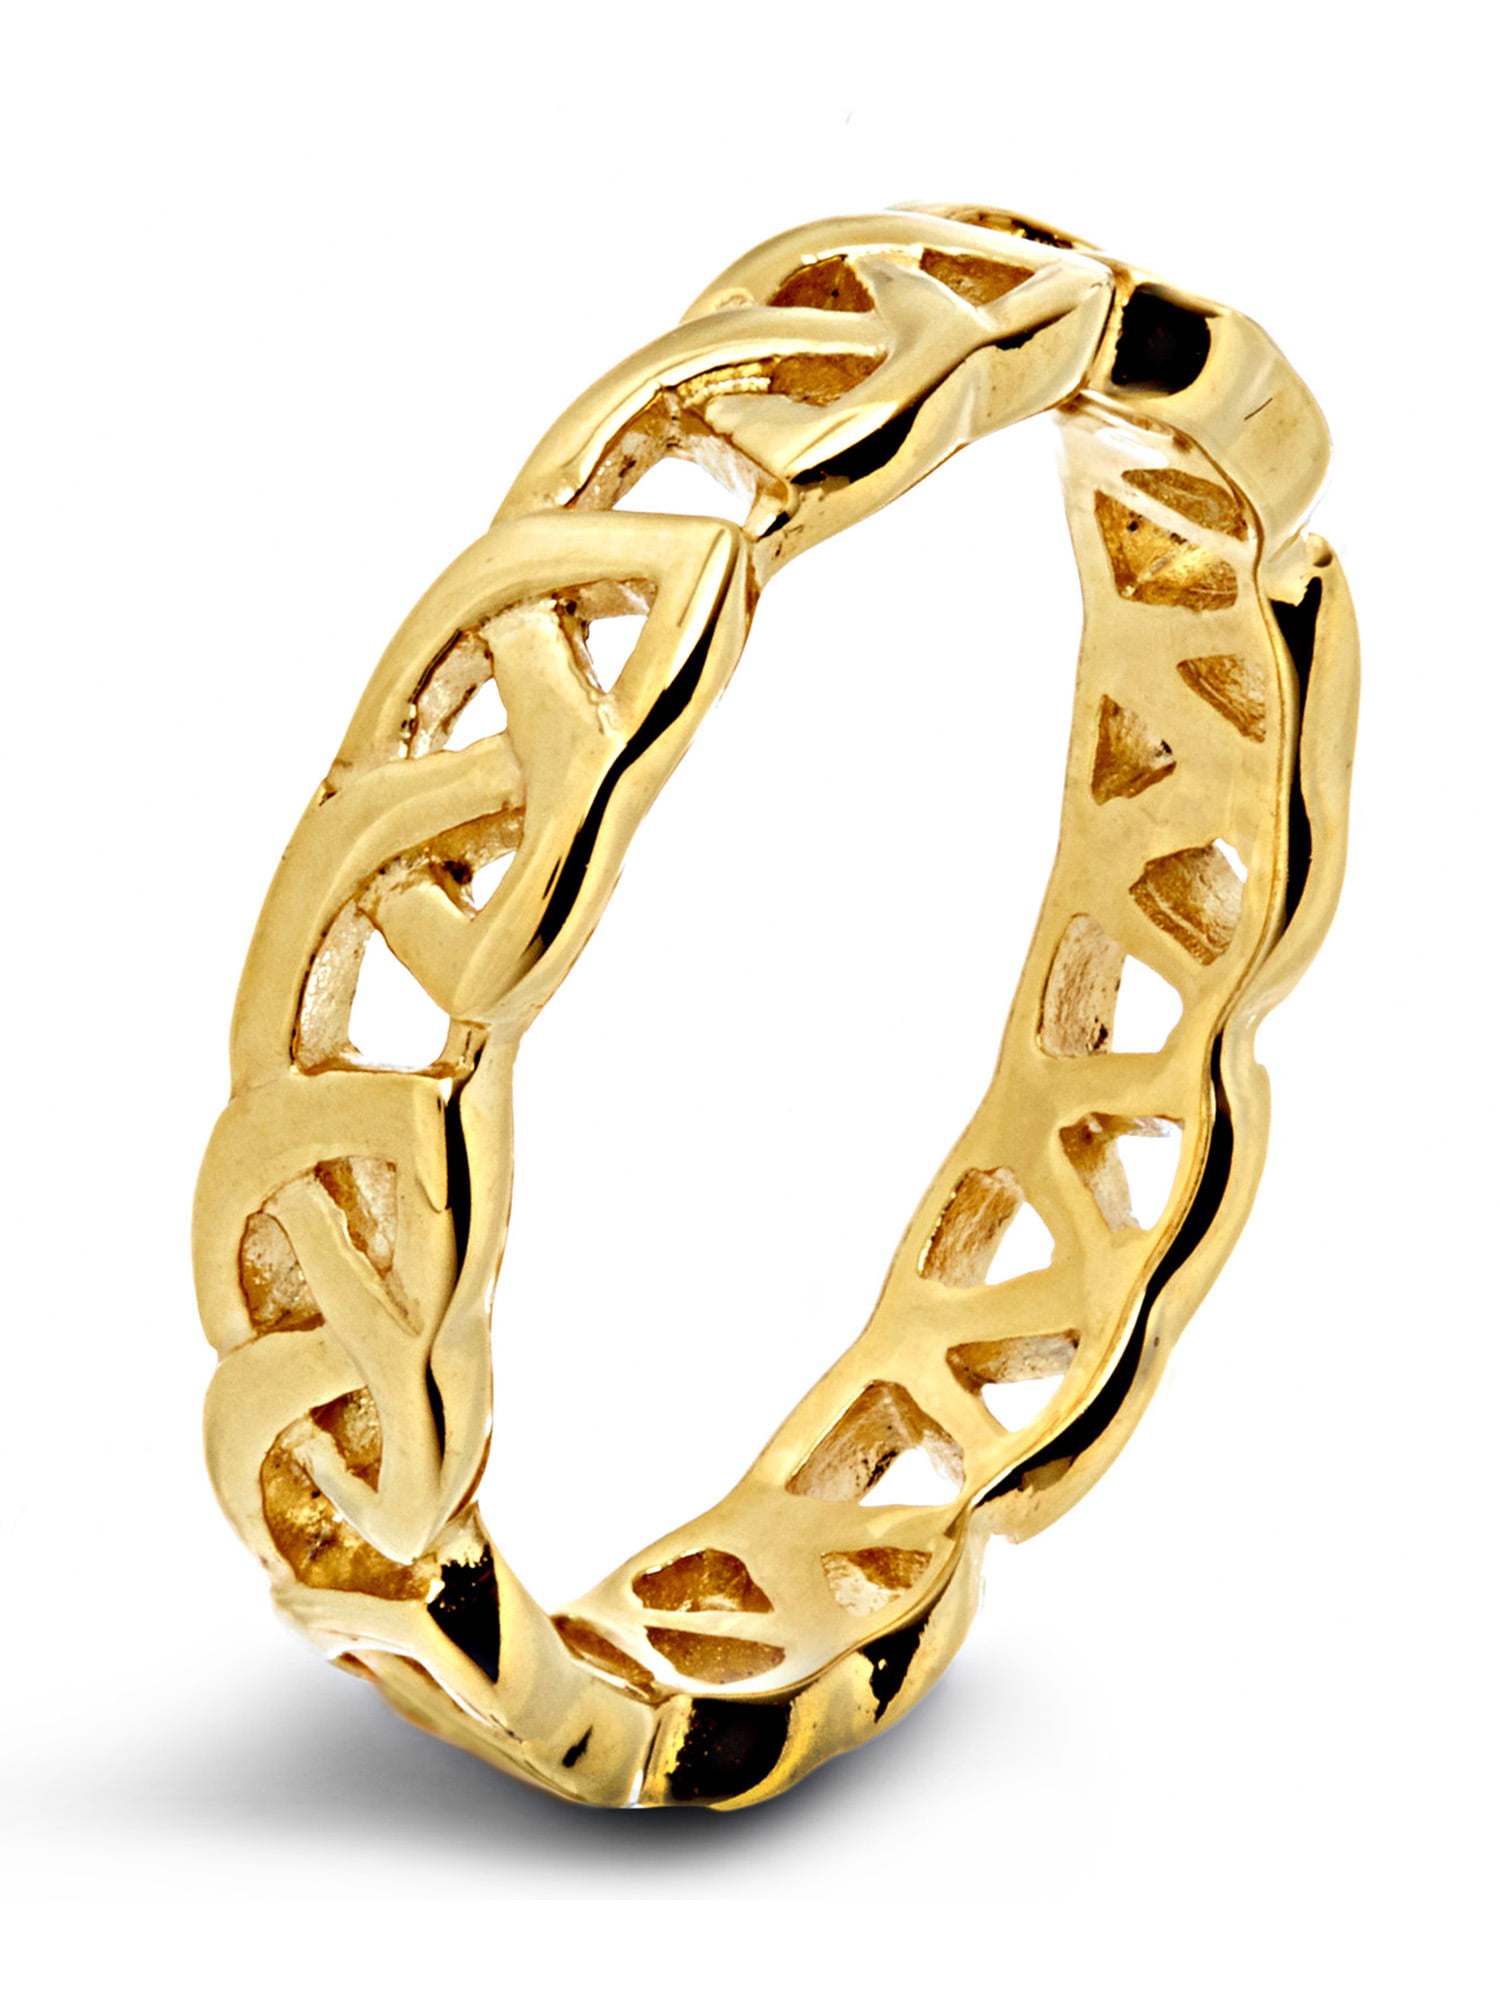 STAINLESS STEEL HEAVY CELTIC WEAVE RING WITH GOLD IP 